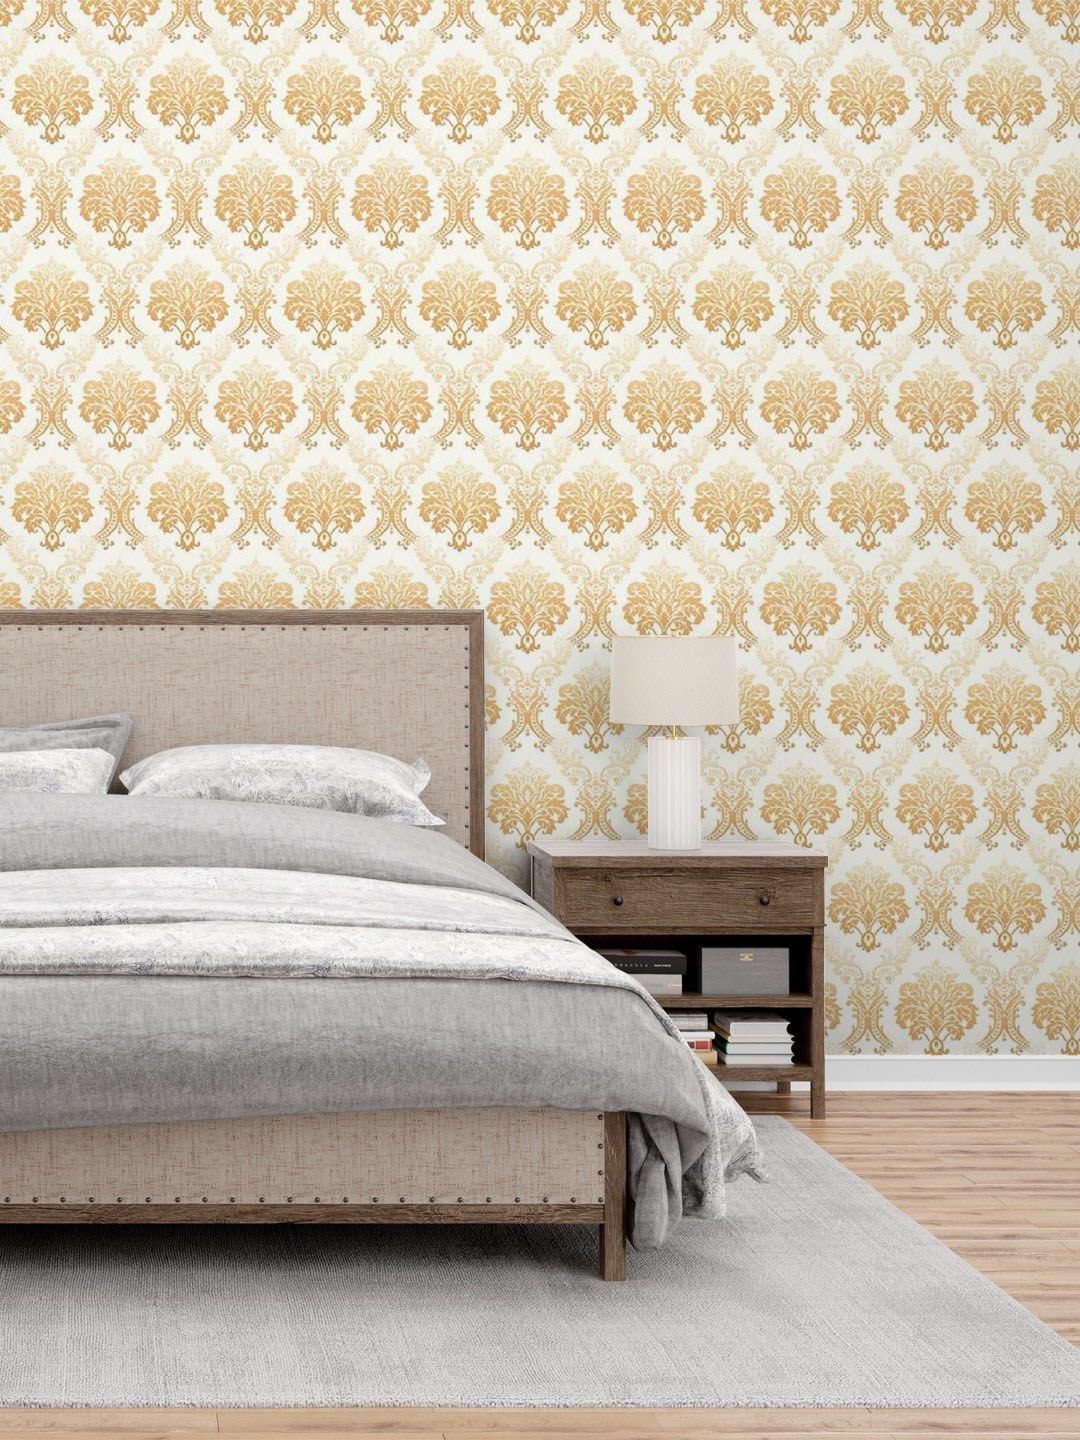 Jaamso Royals Golden & White Ethnic Motifs Printed Self Adhesive Wallpaper Price in India